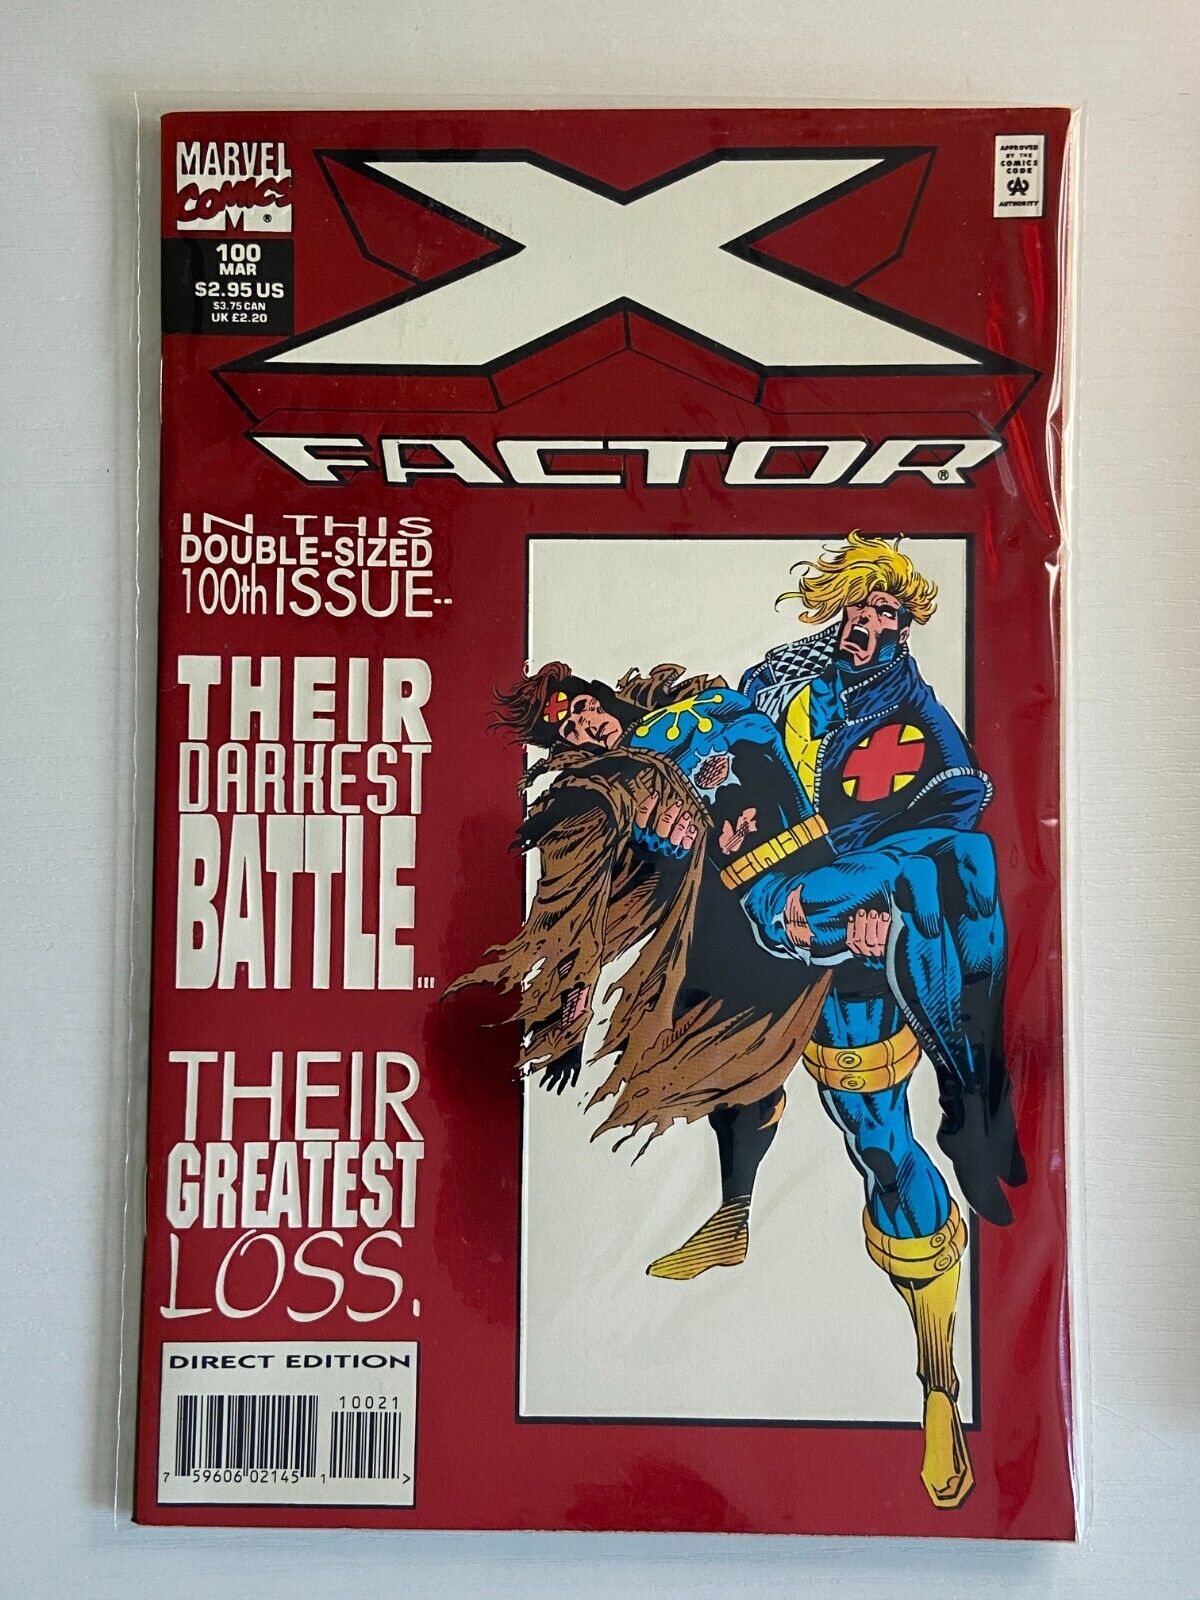 X-Factor #100 - Direct Edition, NM 100th anniversary issue, Red Foil cover